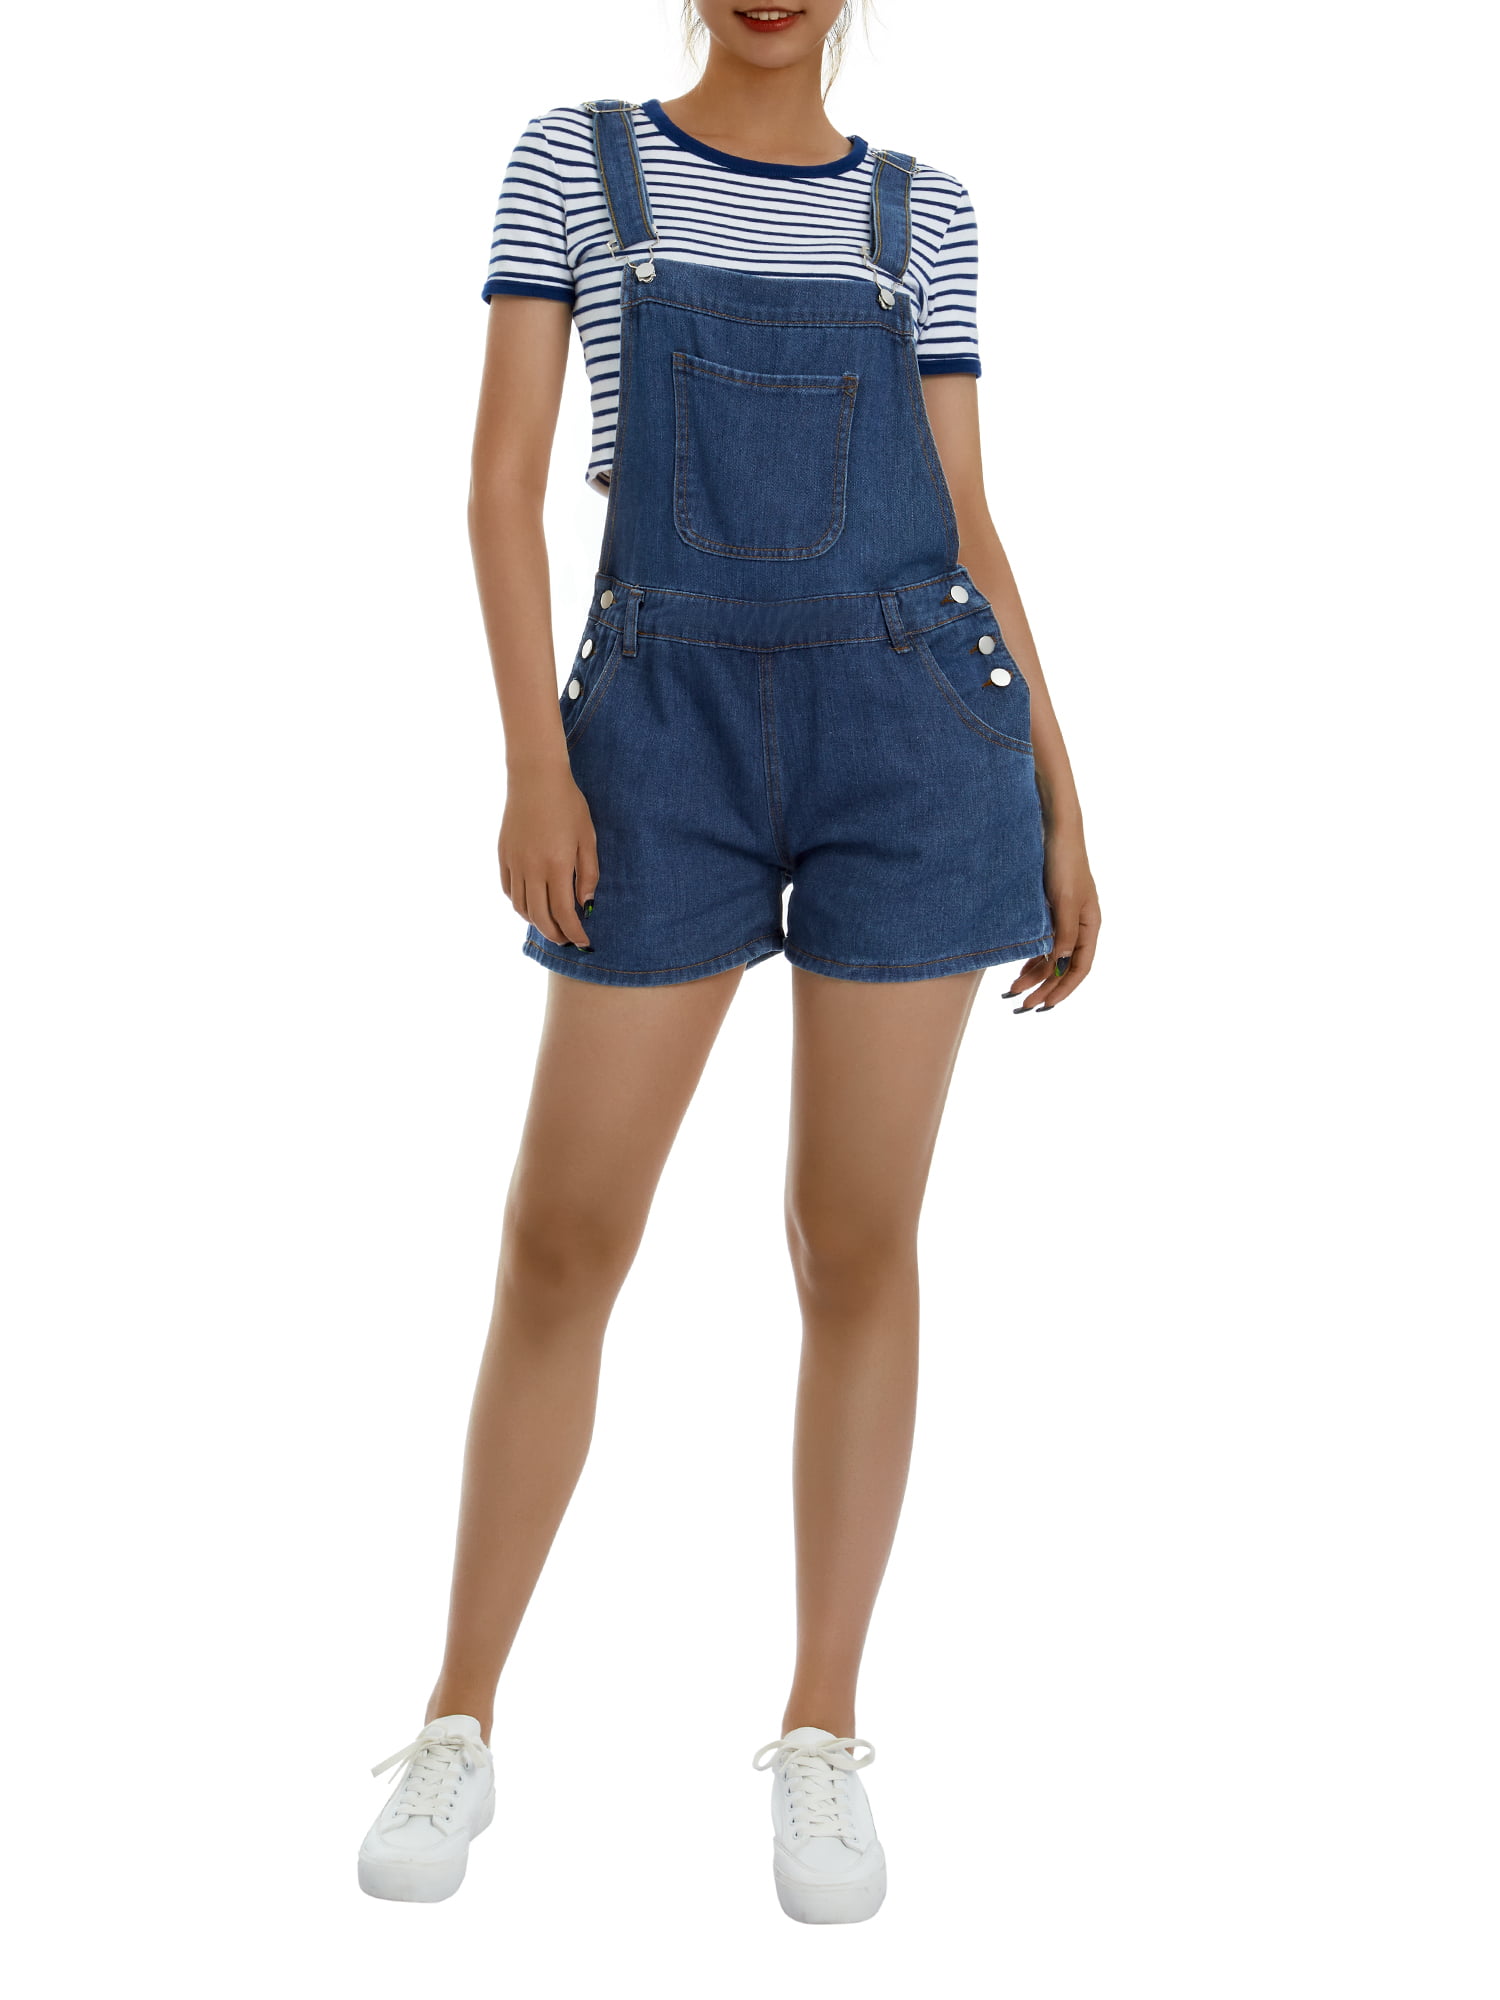 Buy Women's Dungaree Dresses & Shorts at Best Prices